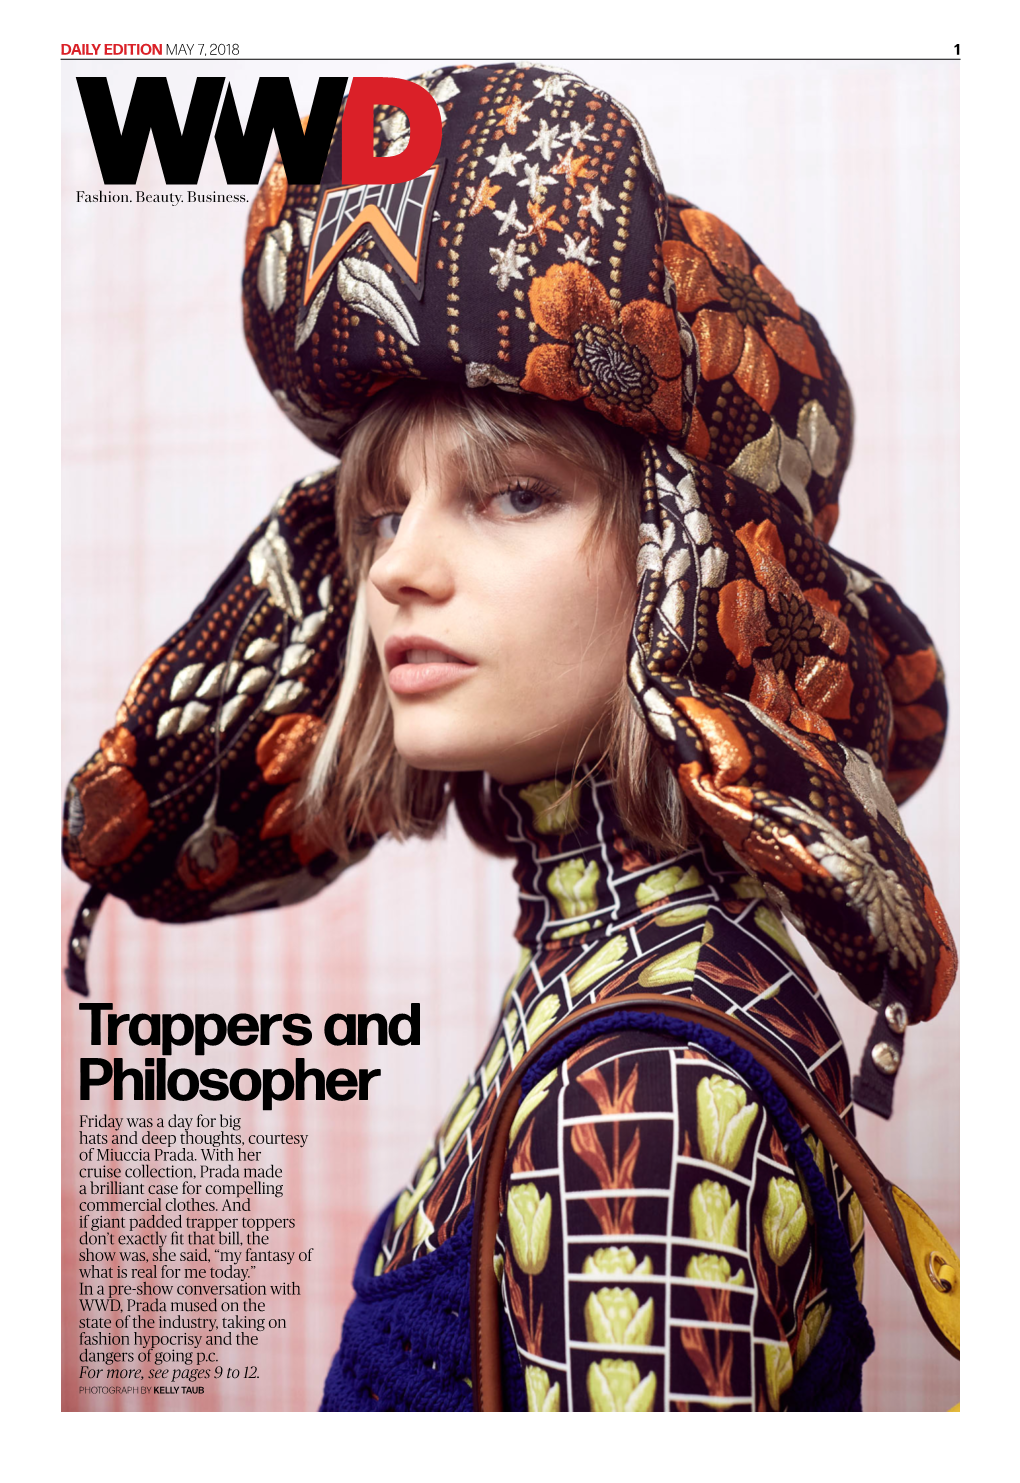 Trappers and Philosopher Friday Was a Day for Big Hats and Deep Thoughts, Courtesy of Miuccia Prada